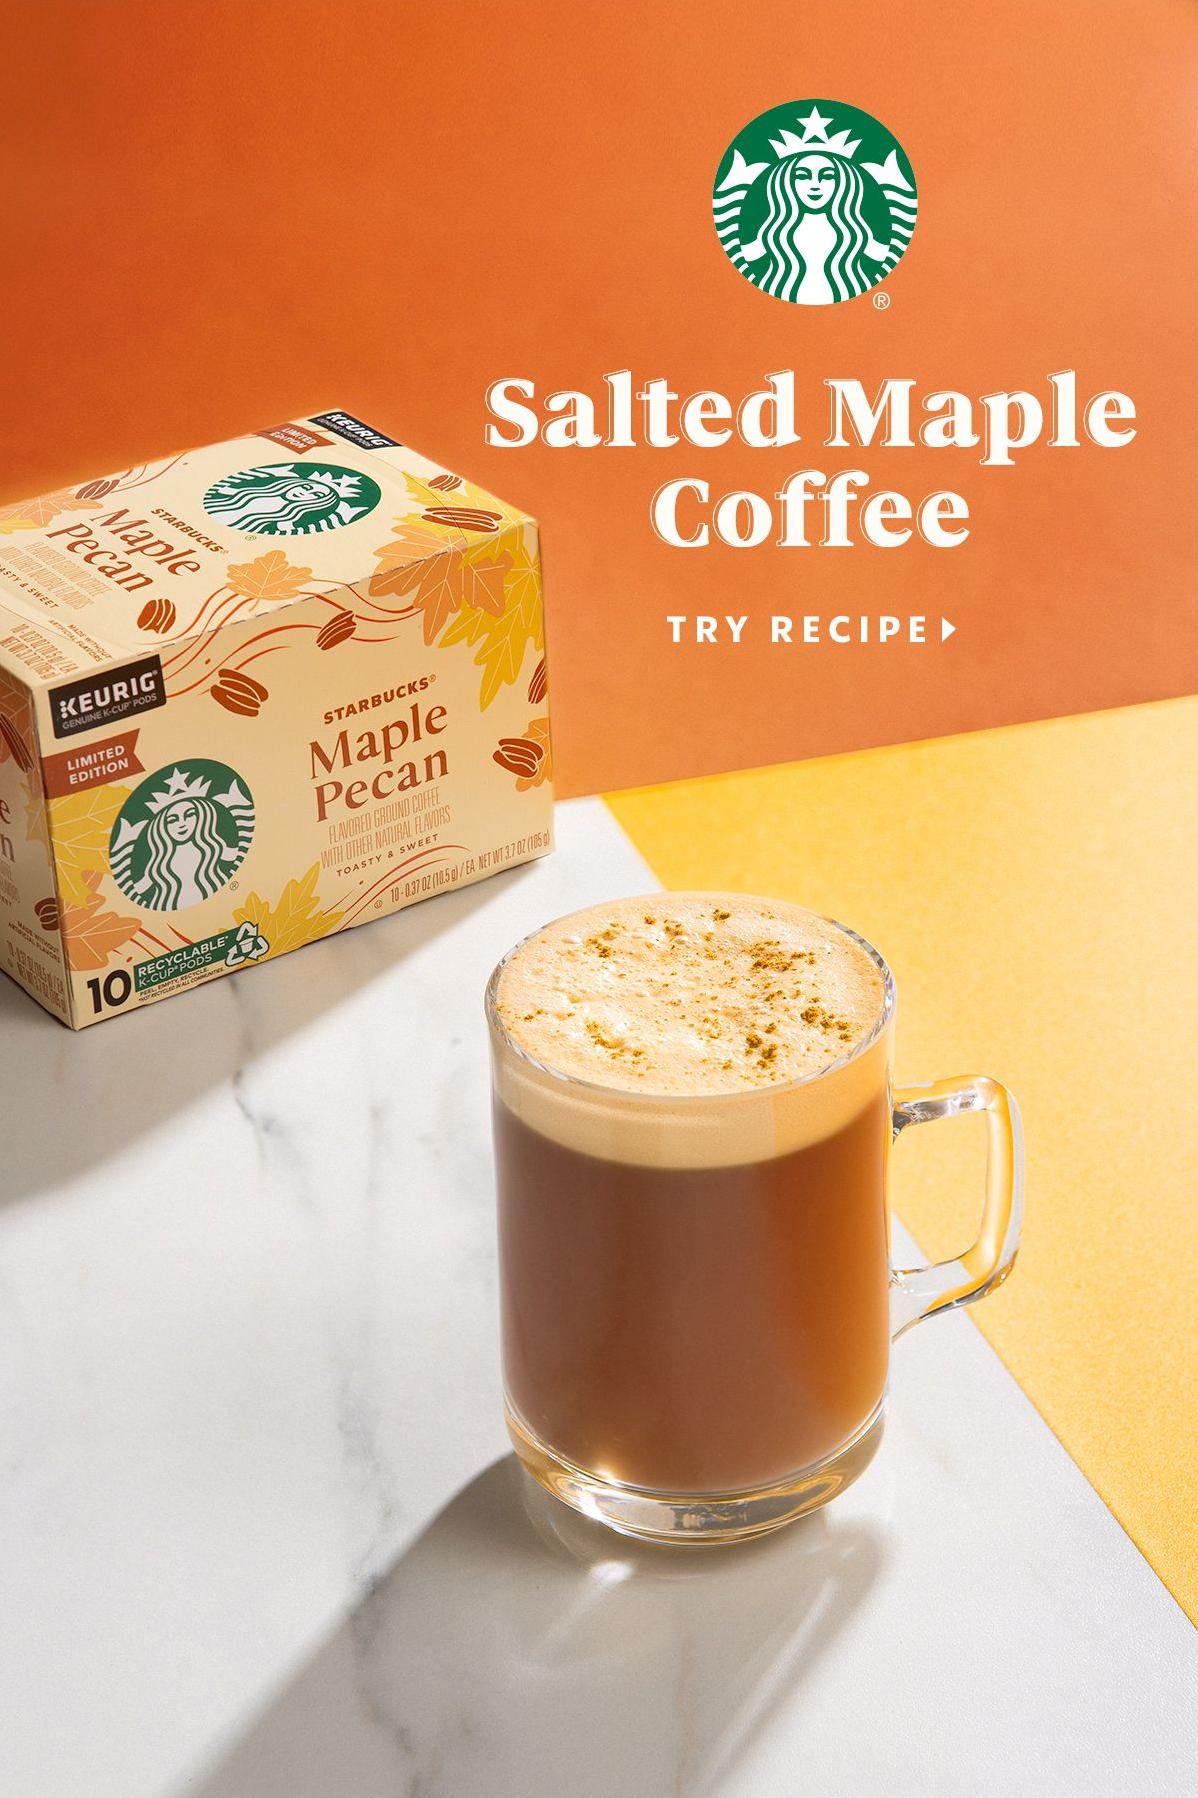  Get ready to indulge in the goodness of maple and caramel flavors.